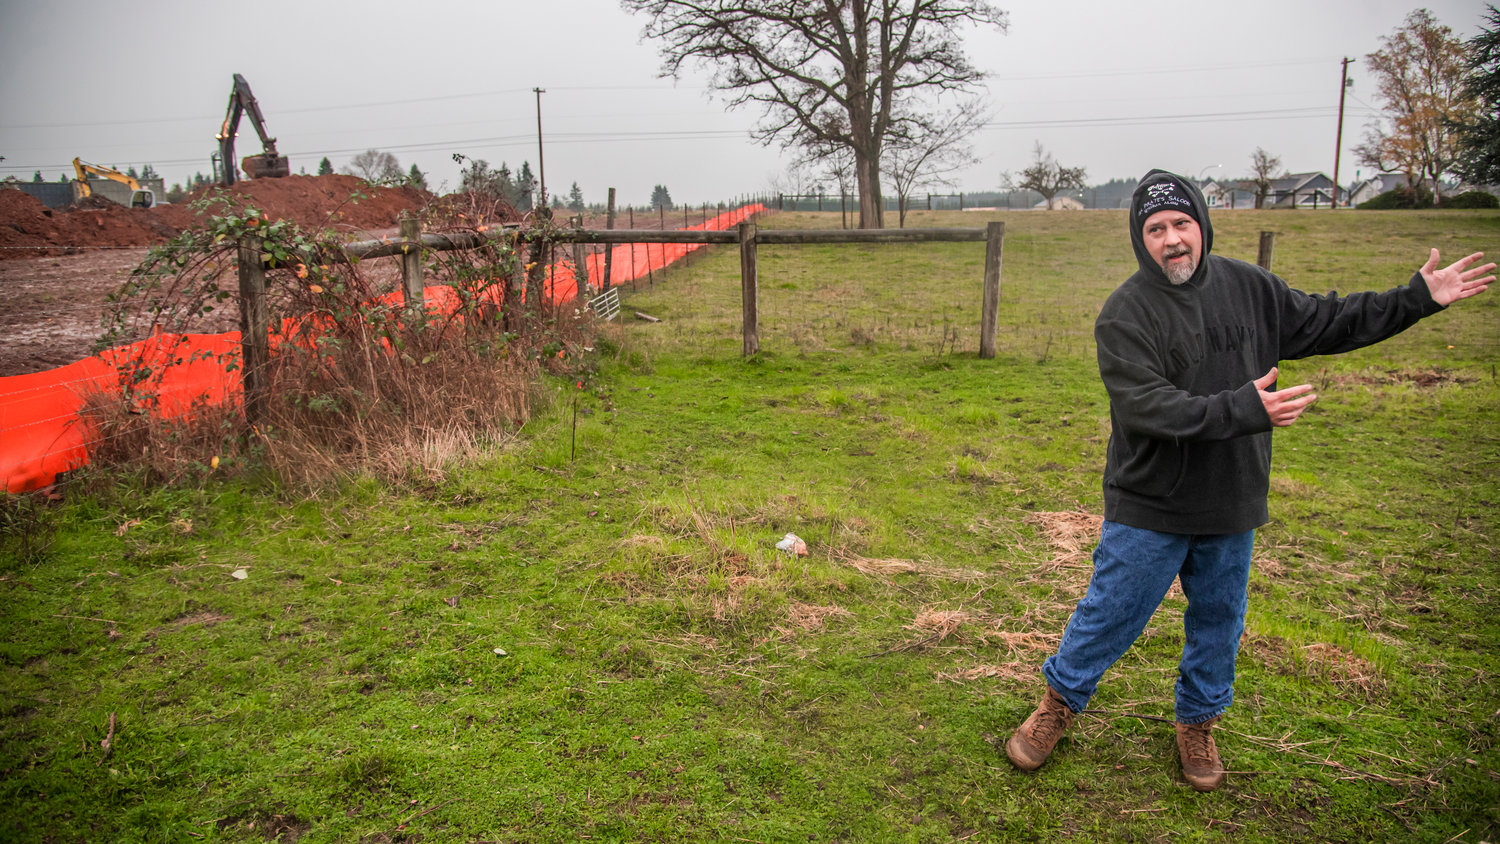 Chad Ruben talks about water that flows through his property during a construction project near his home in Winlock.